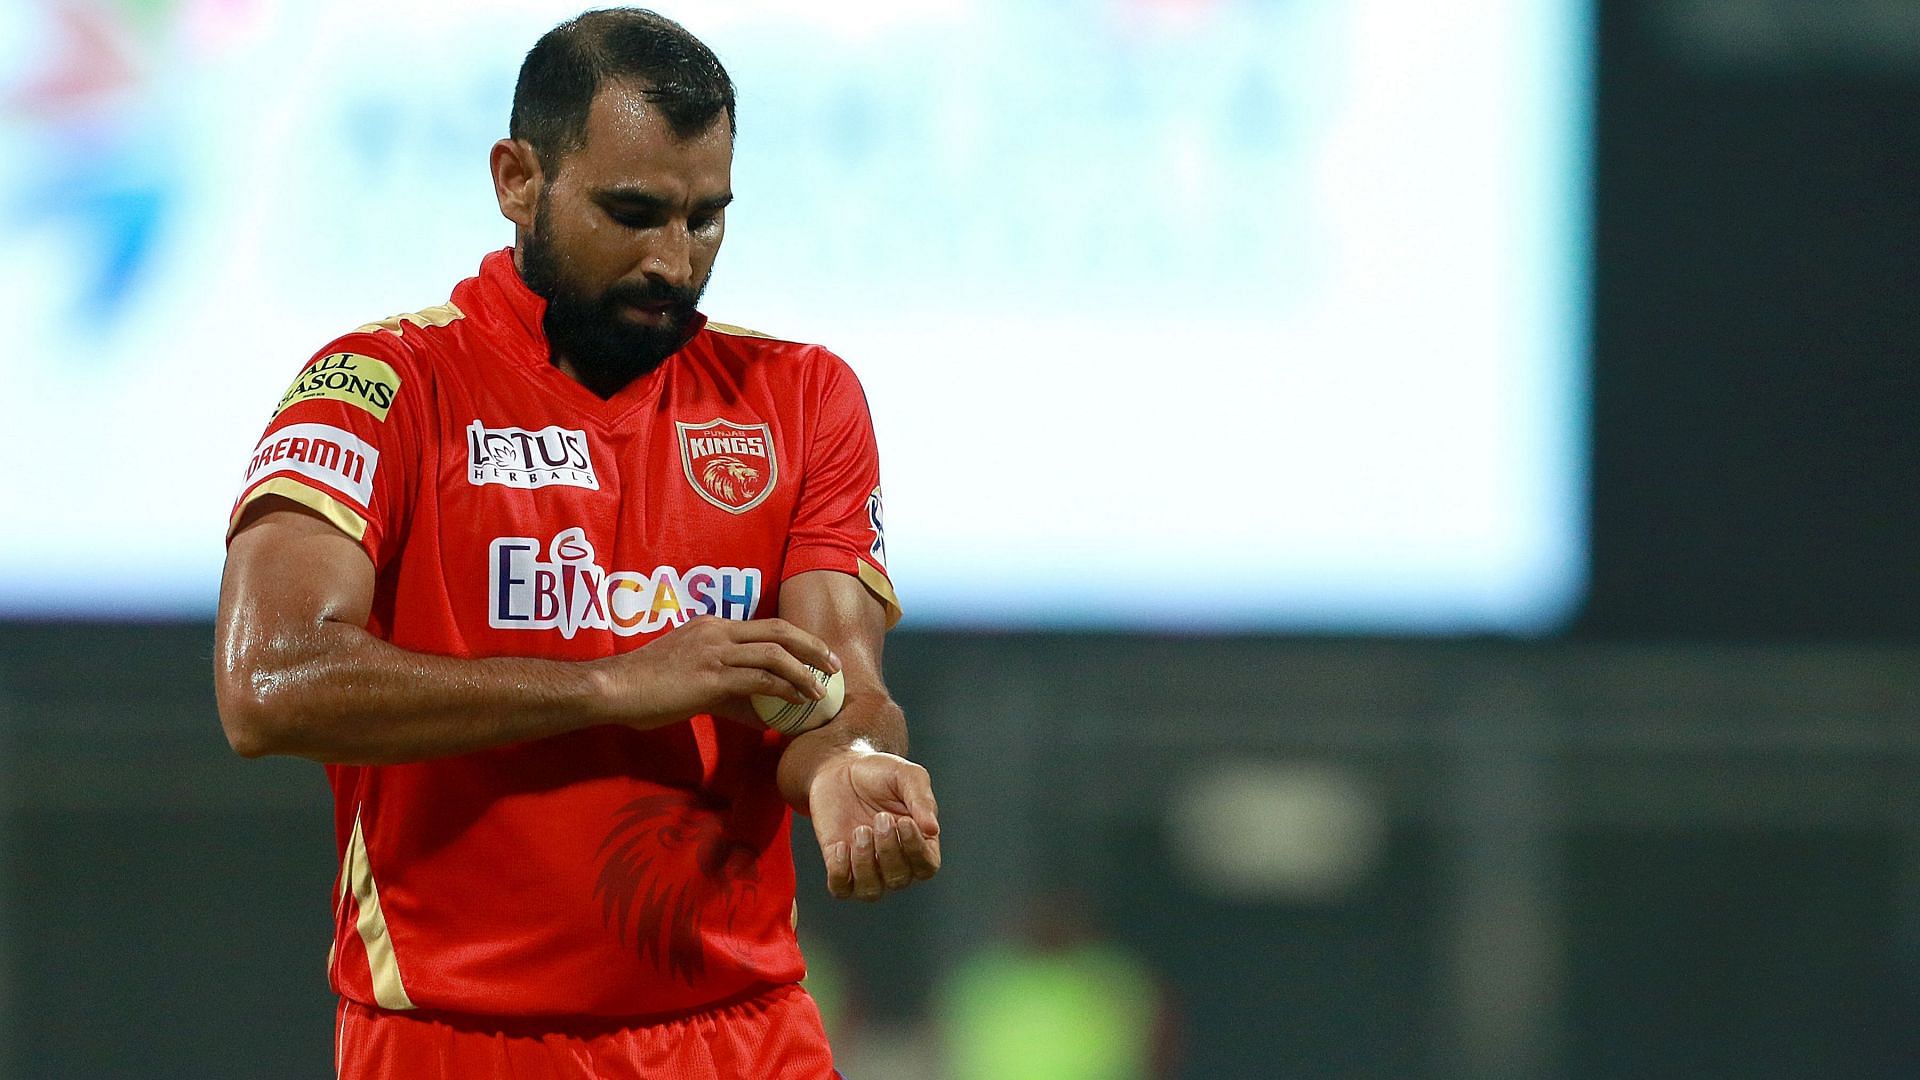 Kolkata Knight Riders must target an experienced Indian pacer like Mohammed Shami at the 2022 IPL Auction